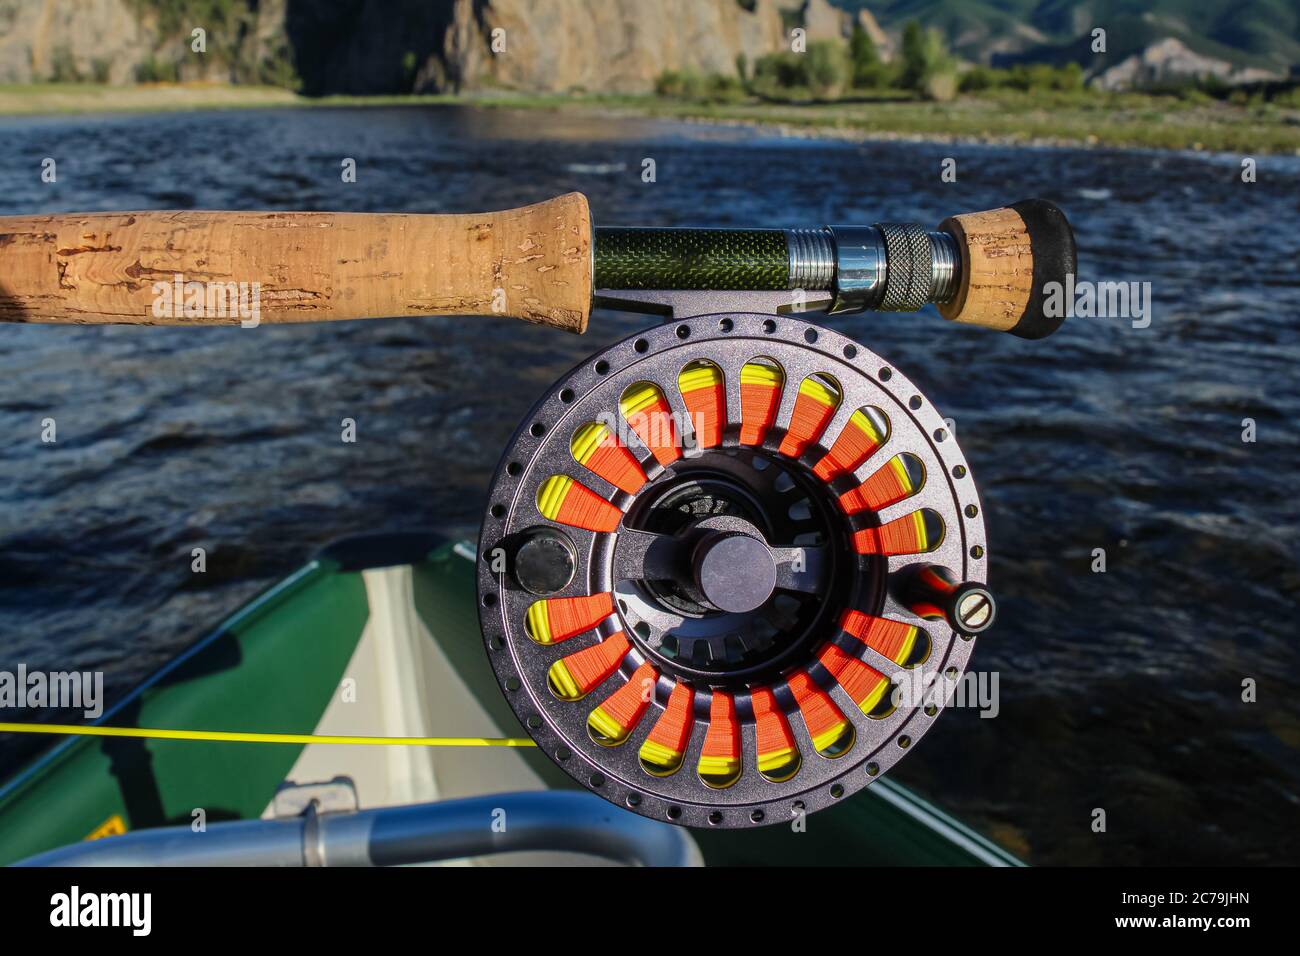 https://c8.alamy.com/comp/2C79JHN/close-up-of-a-fly-fishing-rod-reel-and-fly-line-in-the-late-evening-sun-2C79JHN.jpg